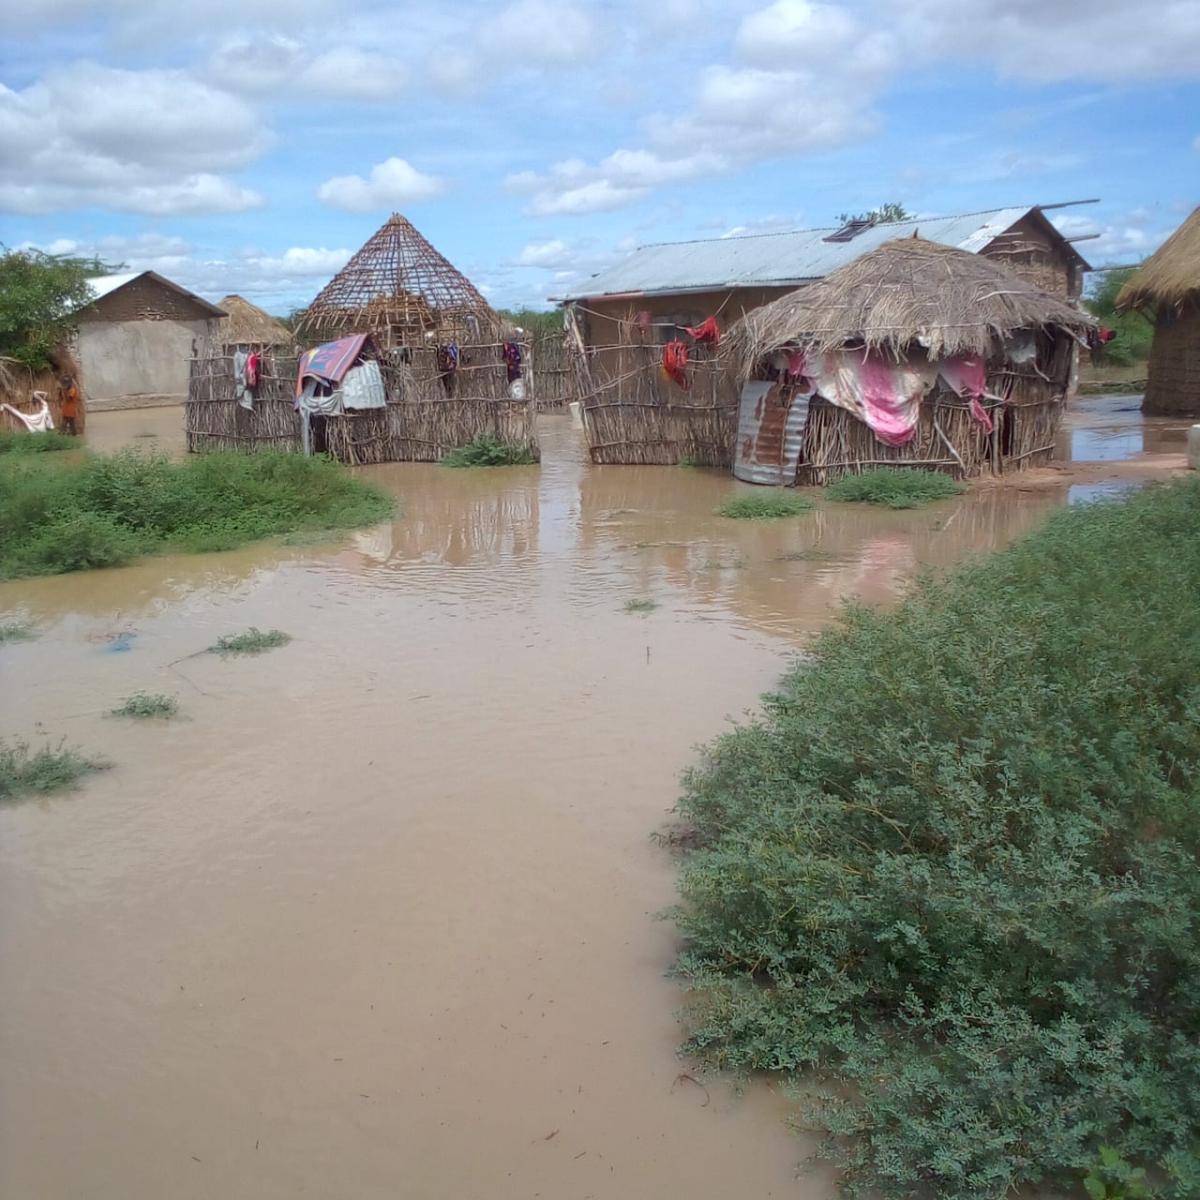 In Kenya, over 280,000 people have been displaced by deadly floods.